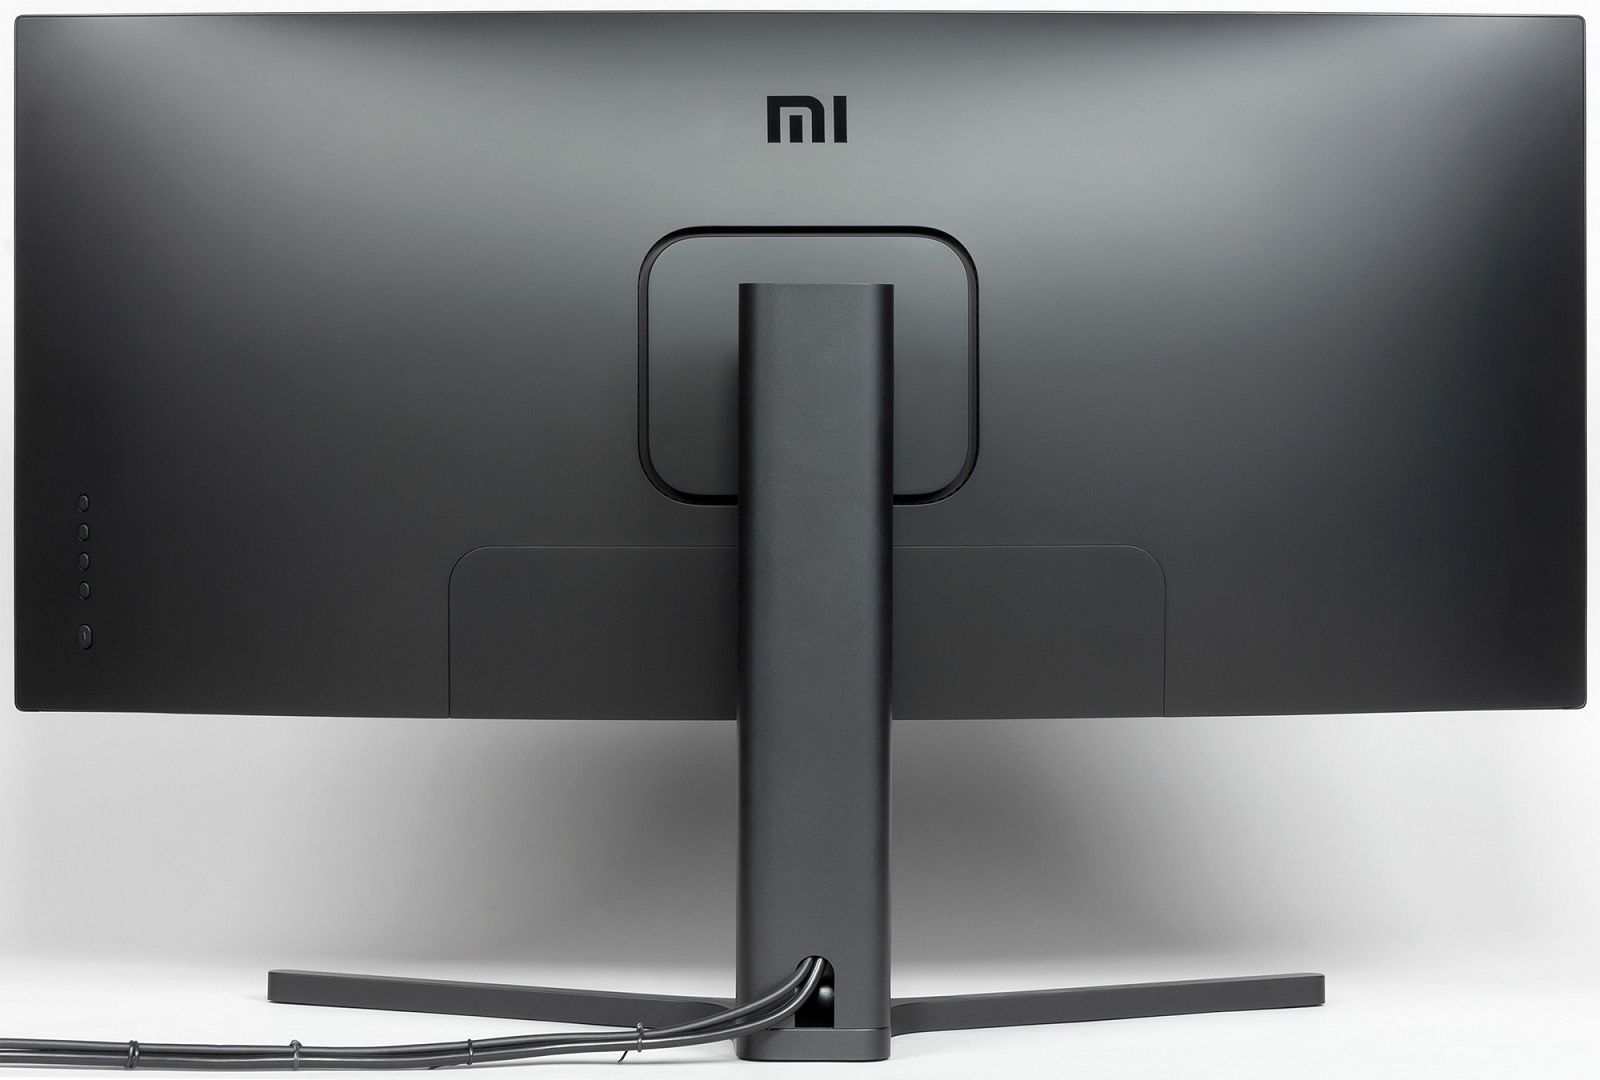 Xiaomi Curved Gaming 34